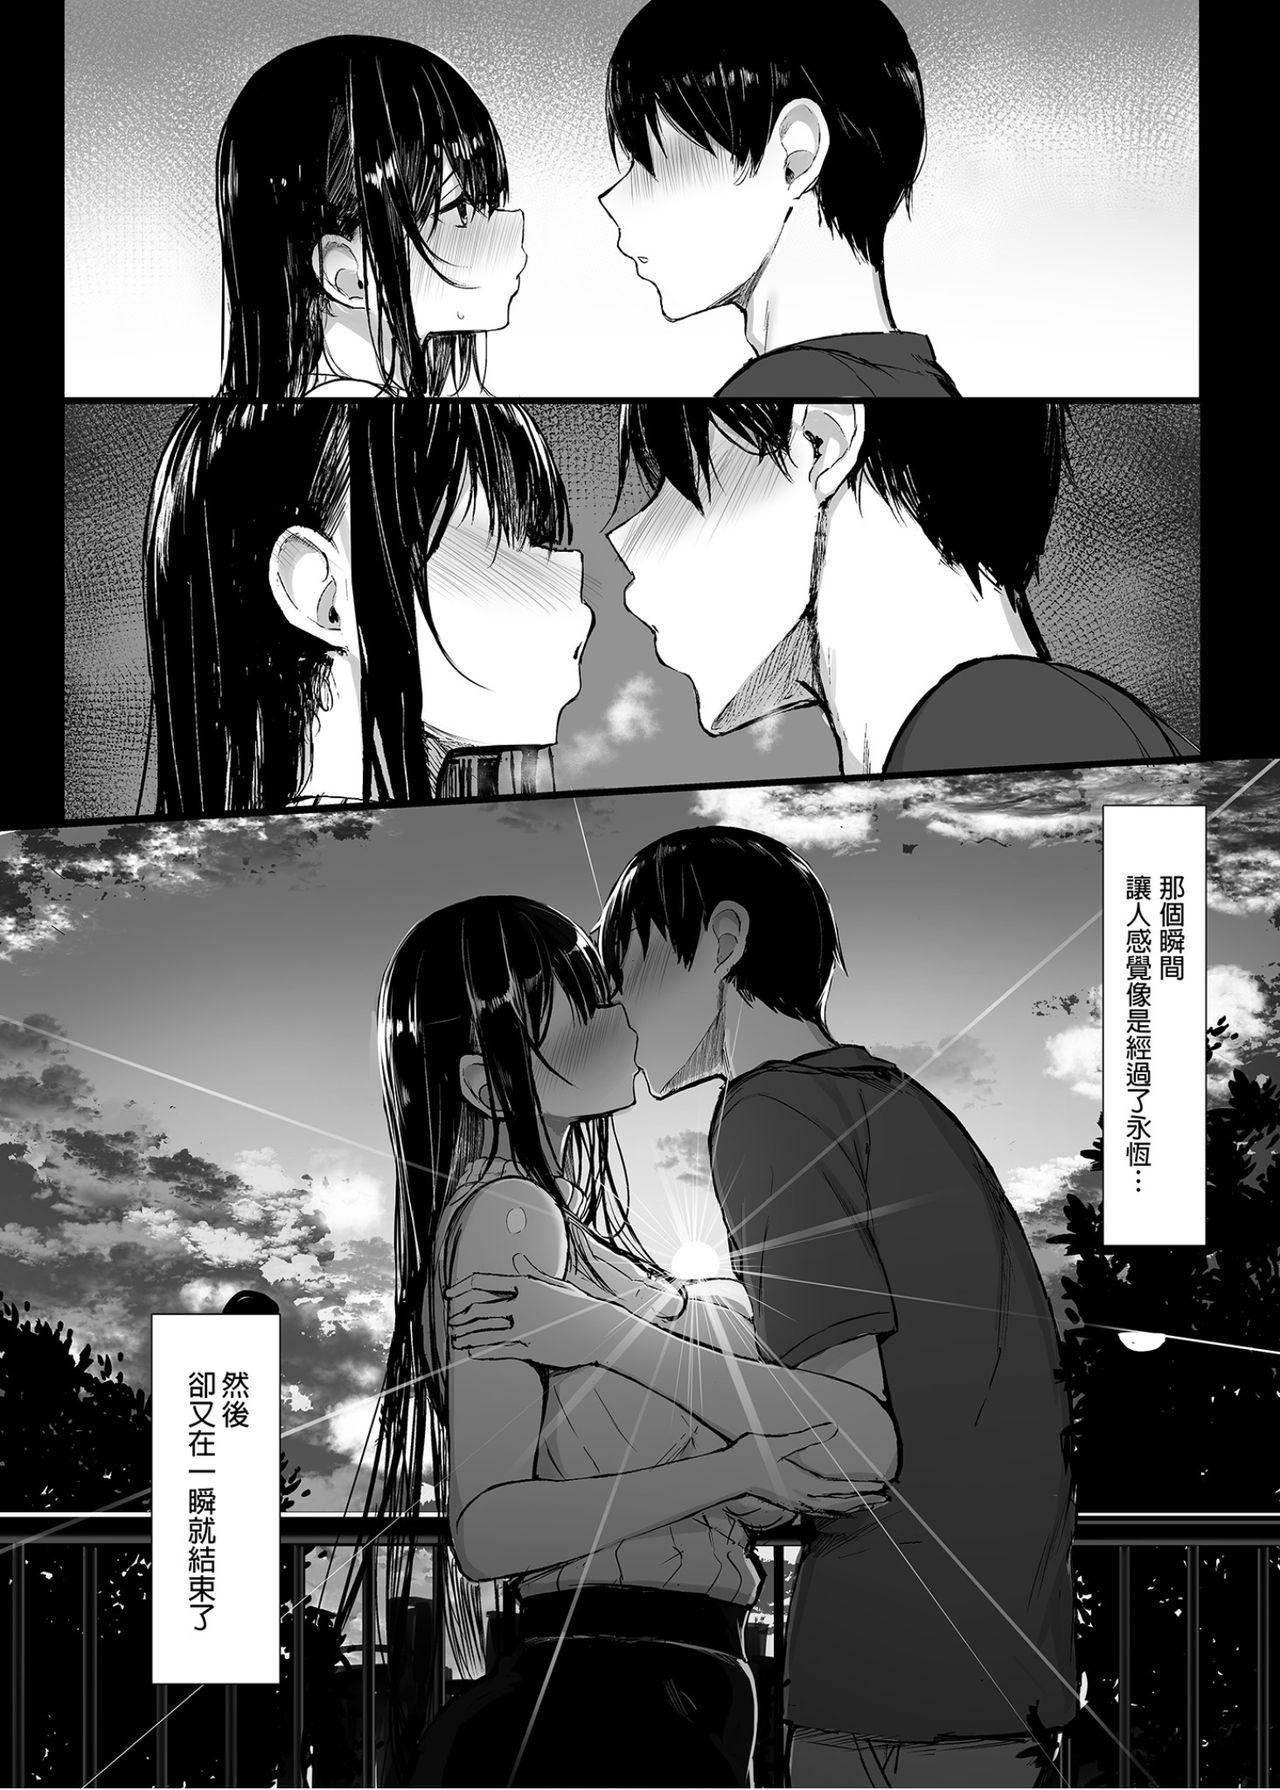 Best Blowjobs Ever Seiso Kanojo, Ochiru. - Original Old And Young - Page 6